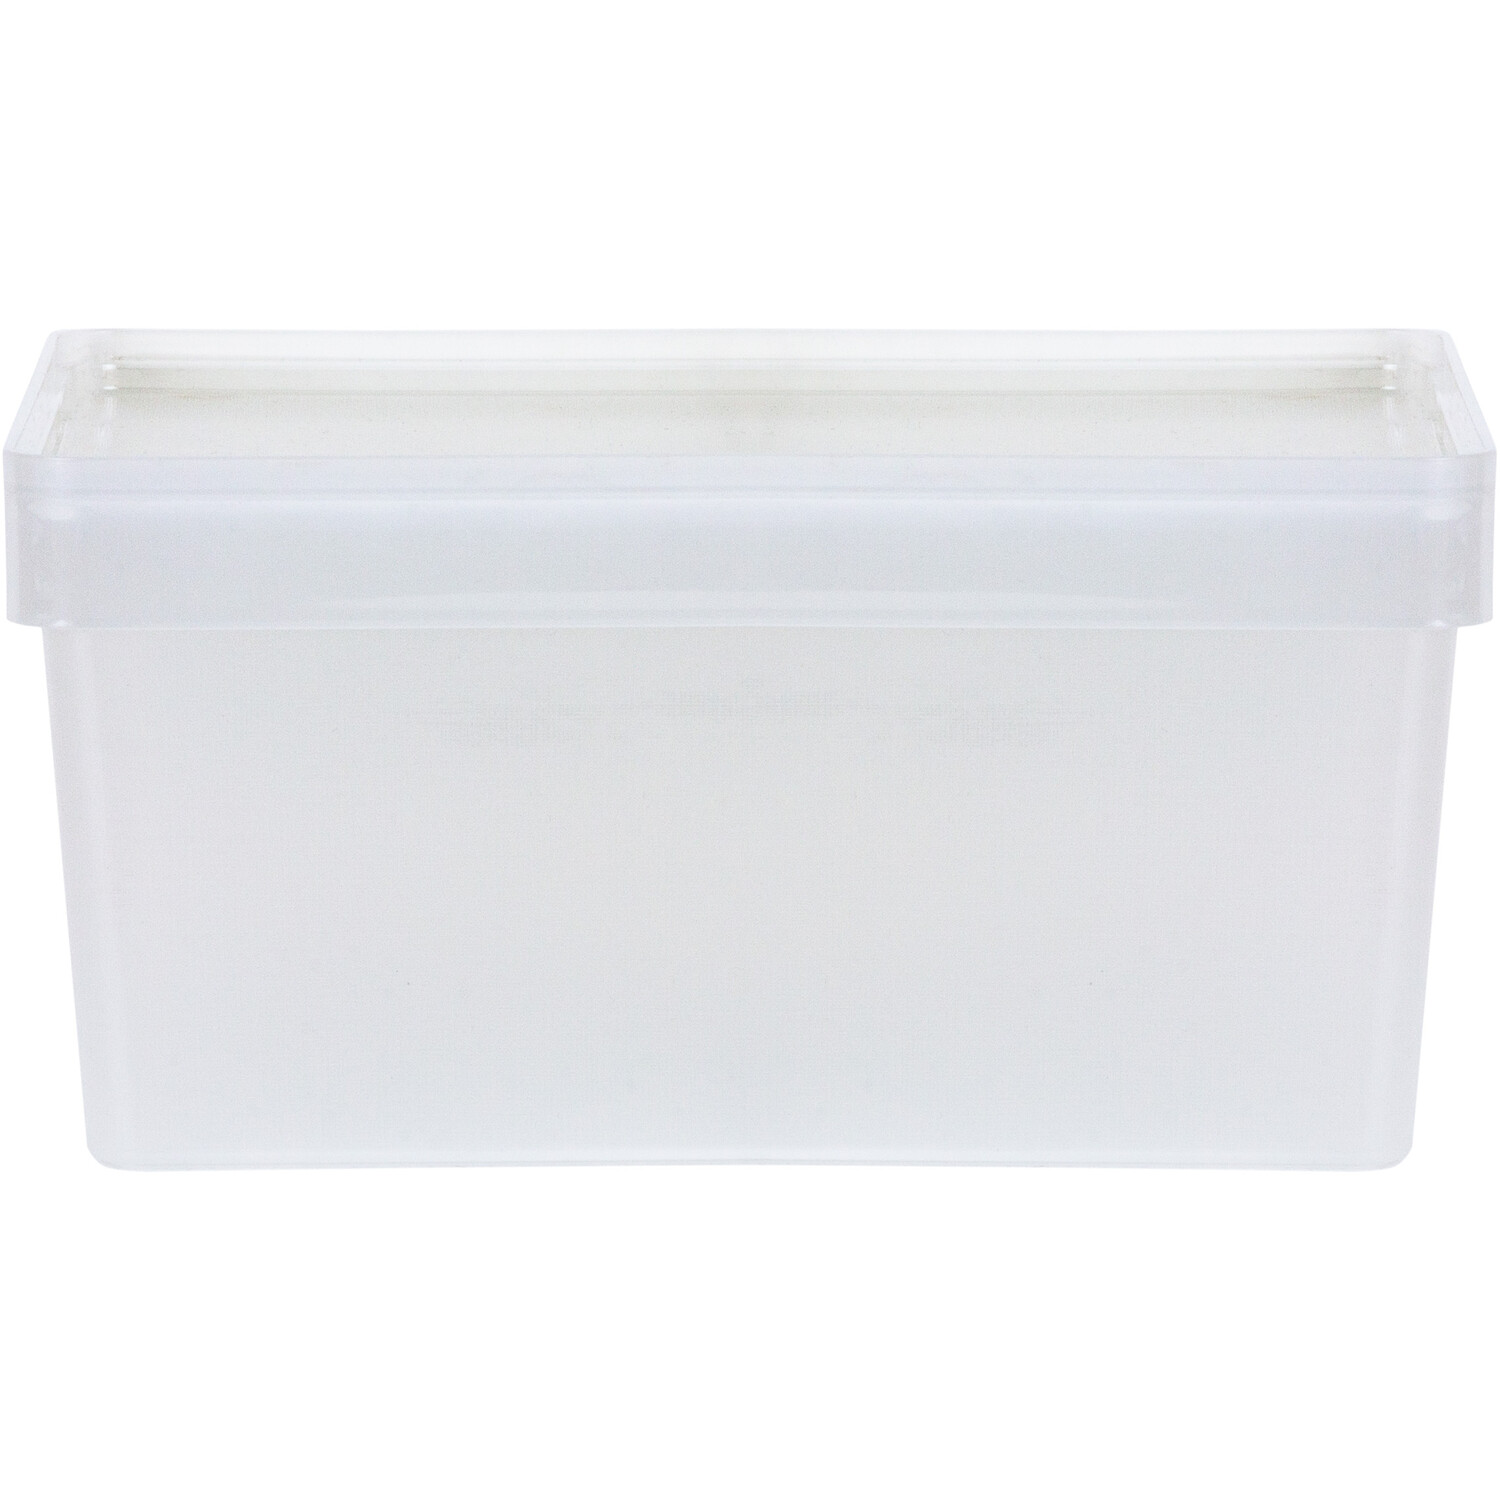 Studio Box and Lid  - Clear / 17cm Image 1